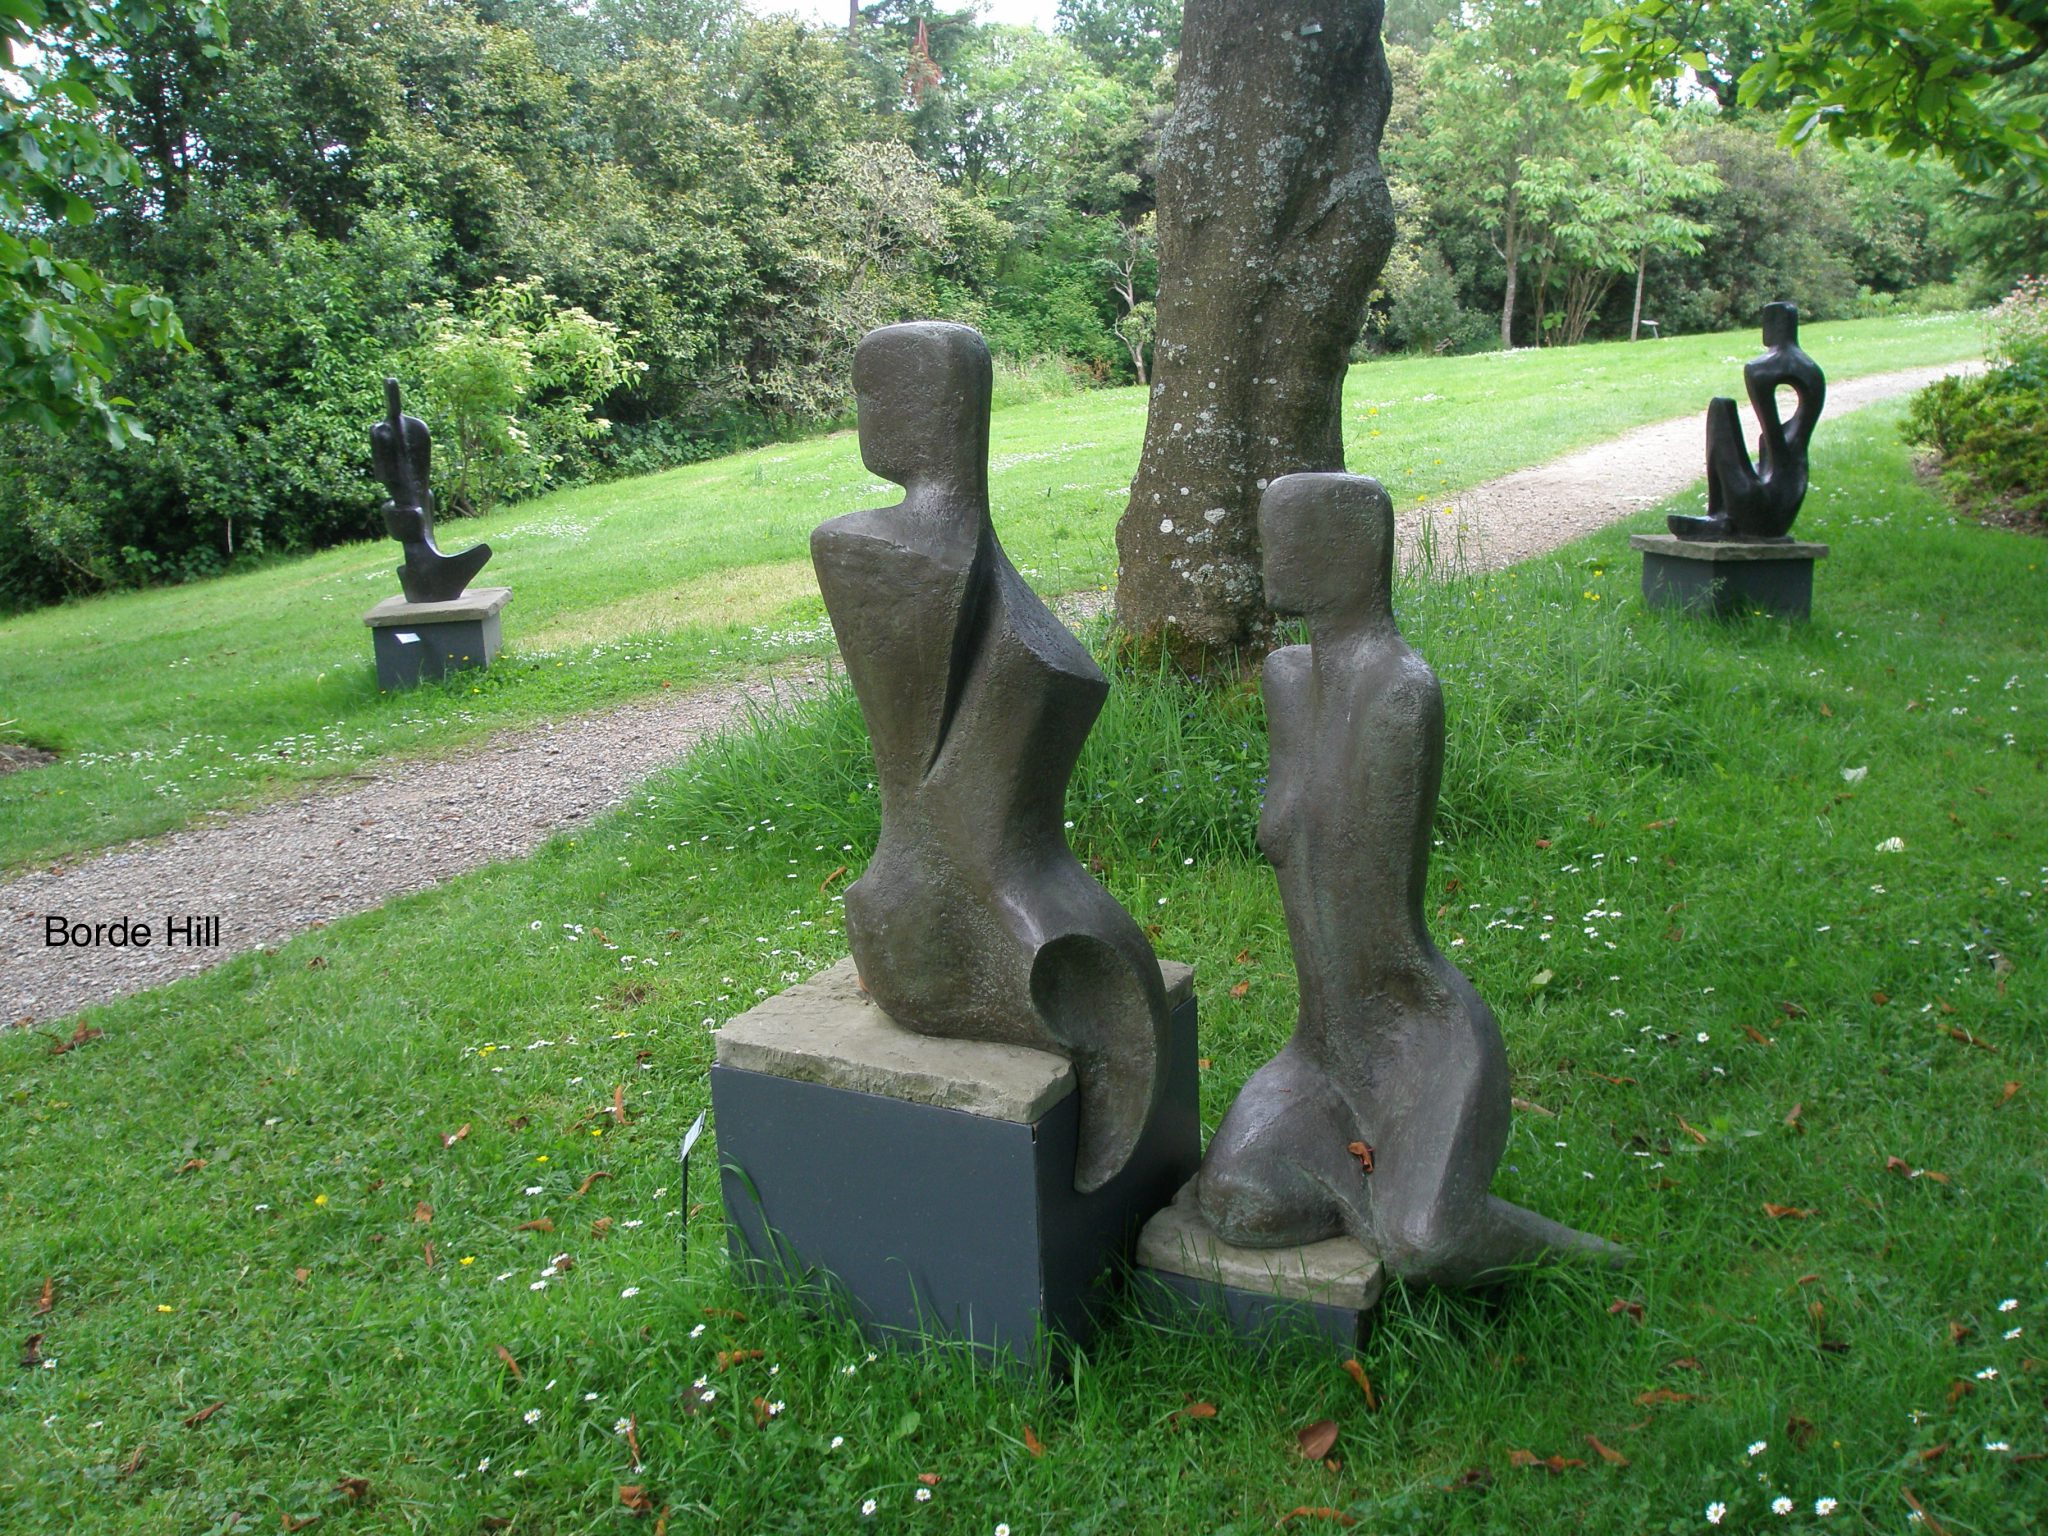 A grouping of figures, in the Arboretum